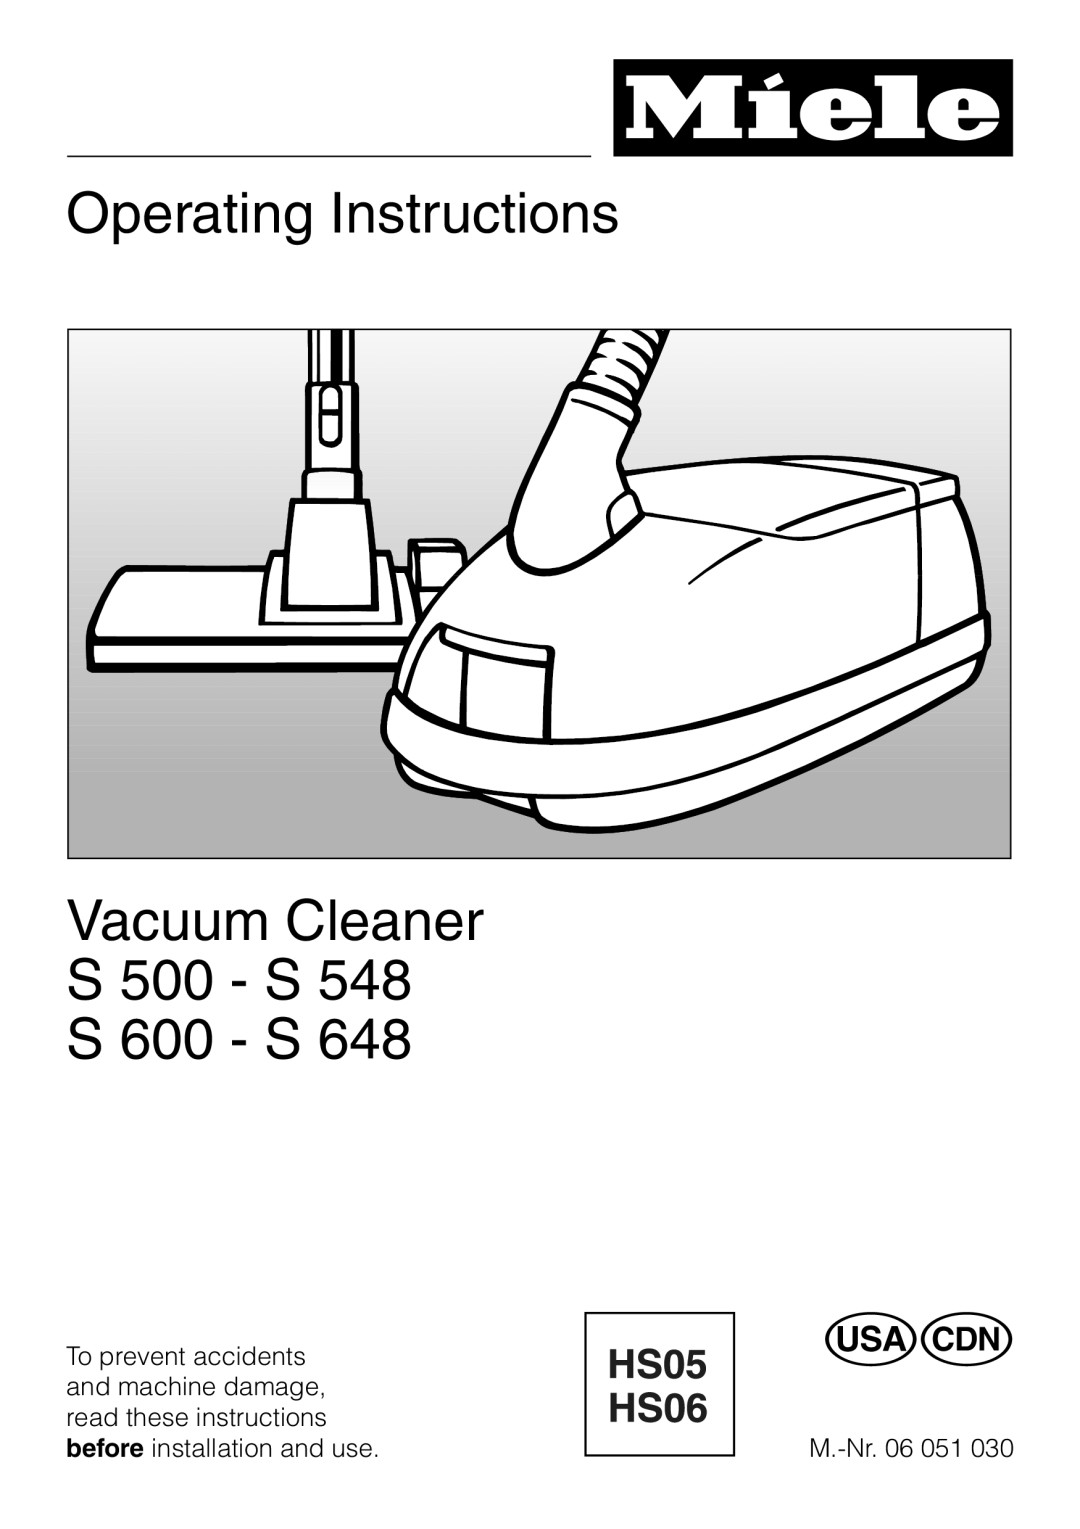 Miele S 648 operating instructions Operating Instructions, Vacuum Cleaner S 500 - S 548 S 600 - S 